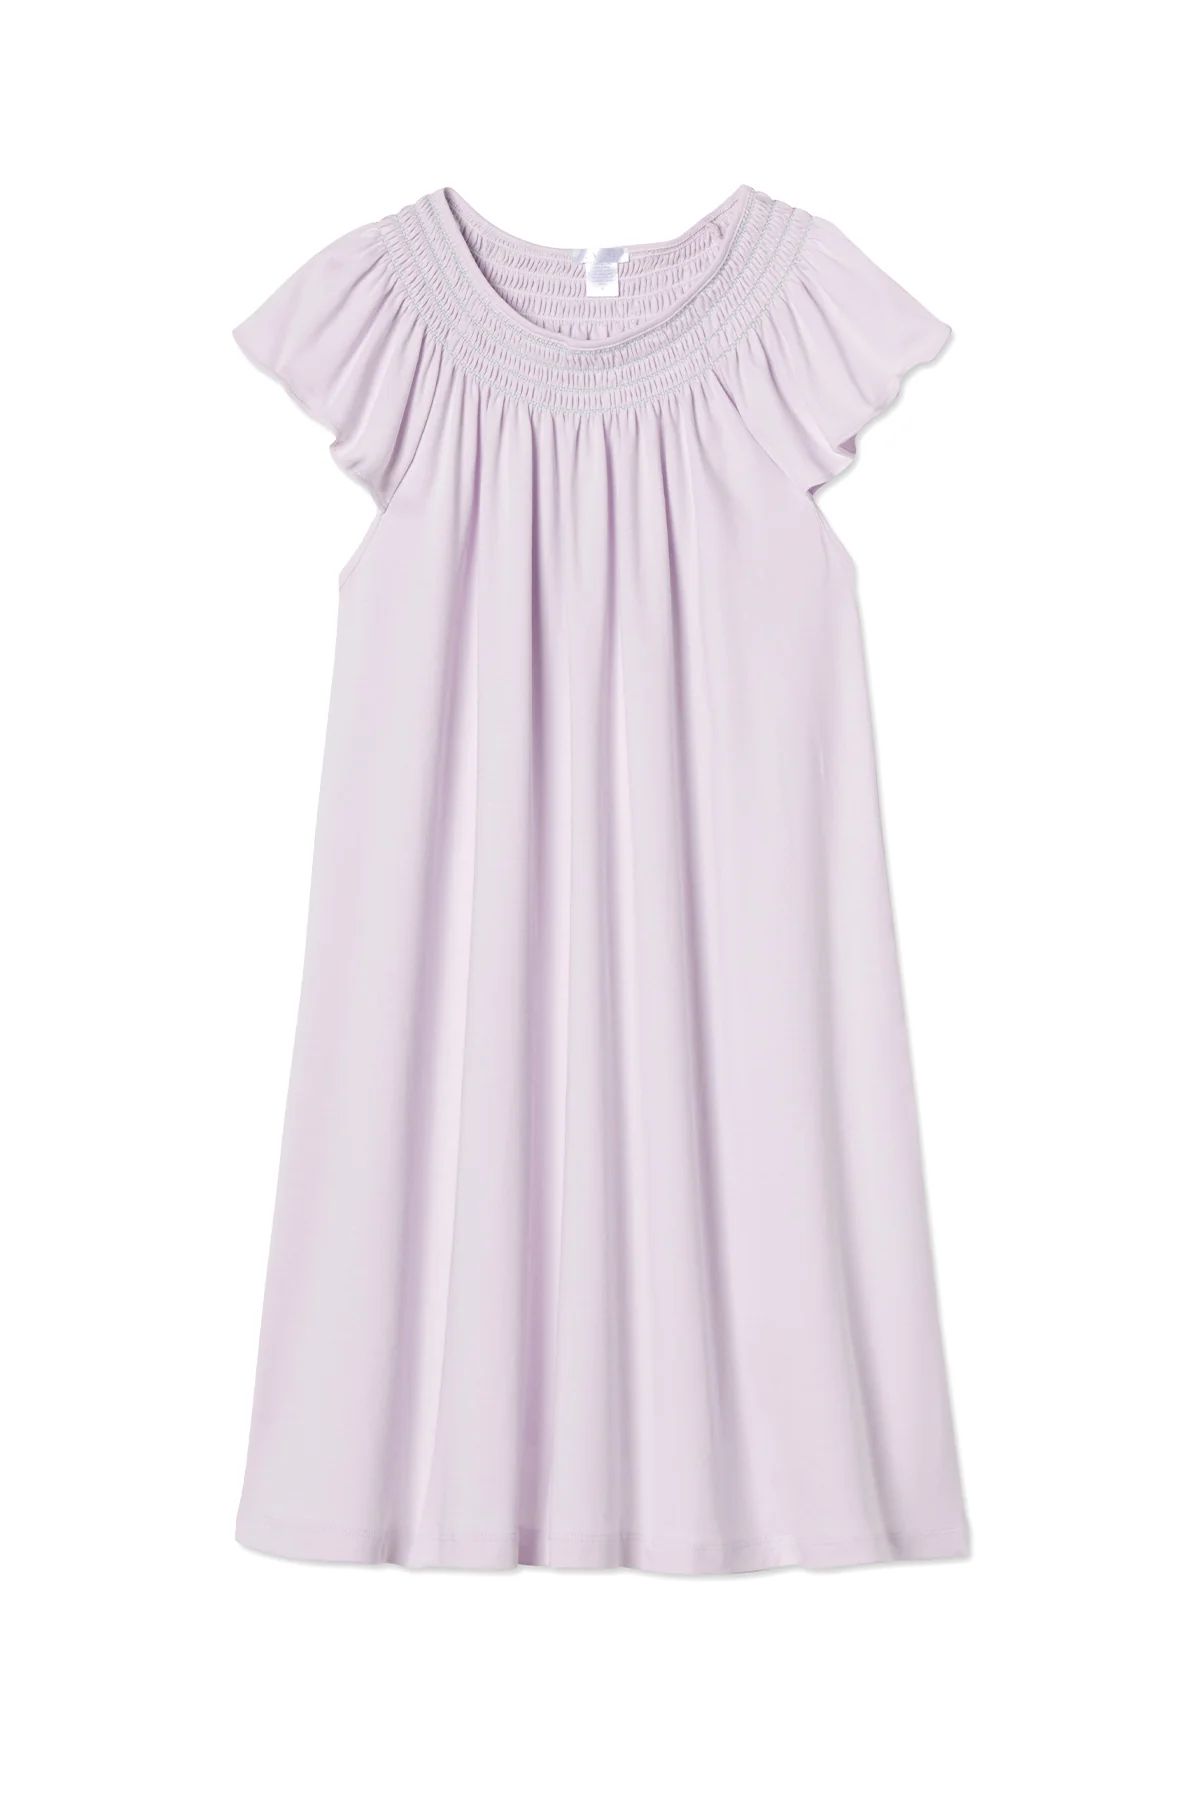 Pima Smocked Flutter Nightgown in Thistle | Lake Pajamas